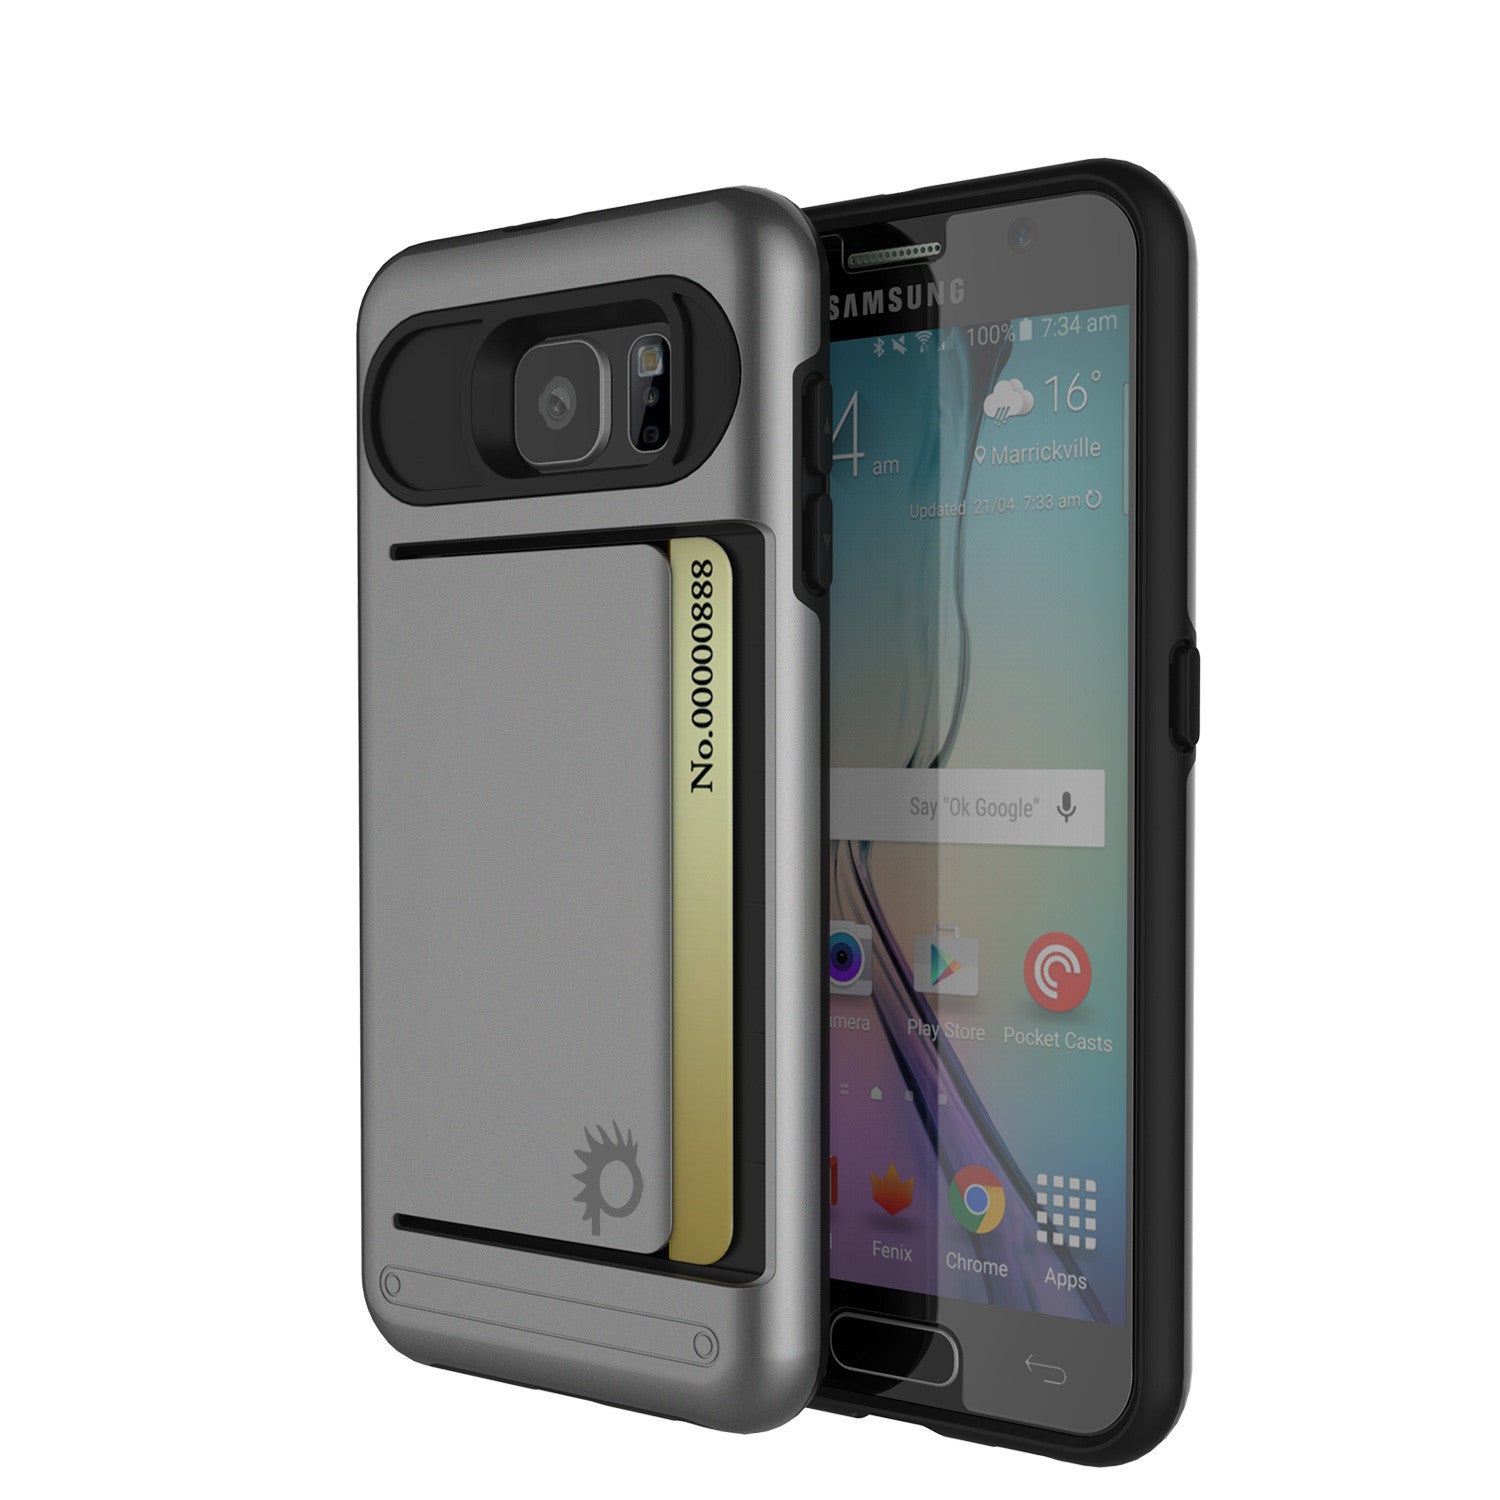 Galaxy s6 Case PunkCase CLUTCH Grey Series Slim Armor Soft Cover Case w/ Tempered Glass (Color in image: Grey)